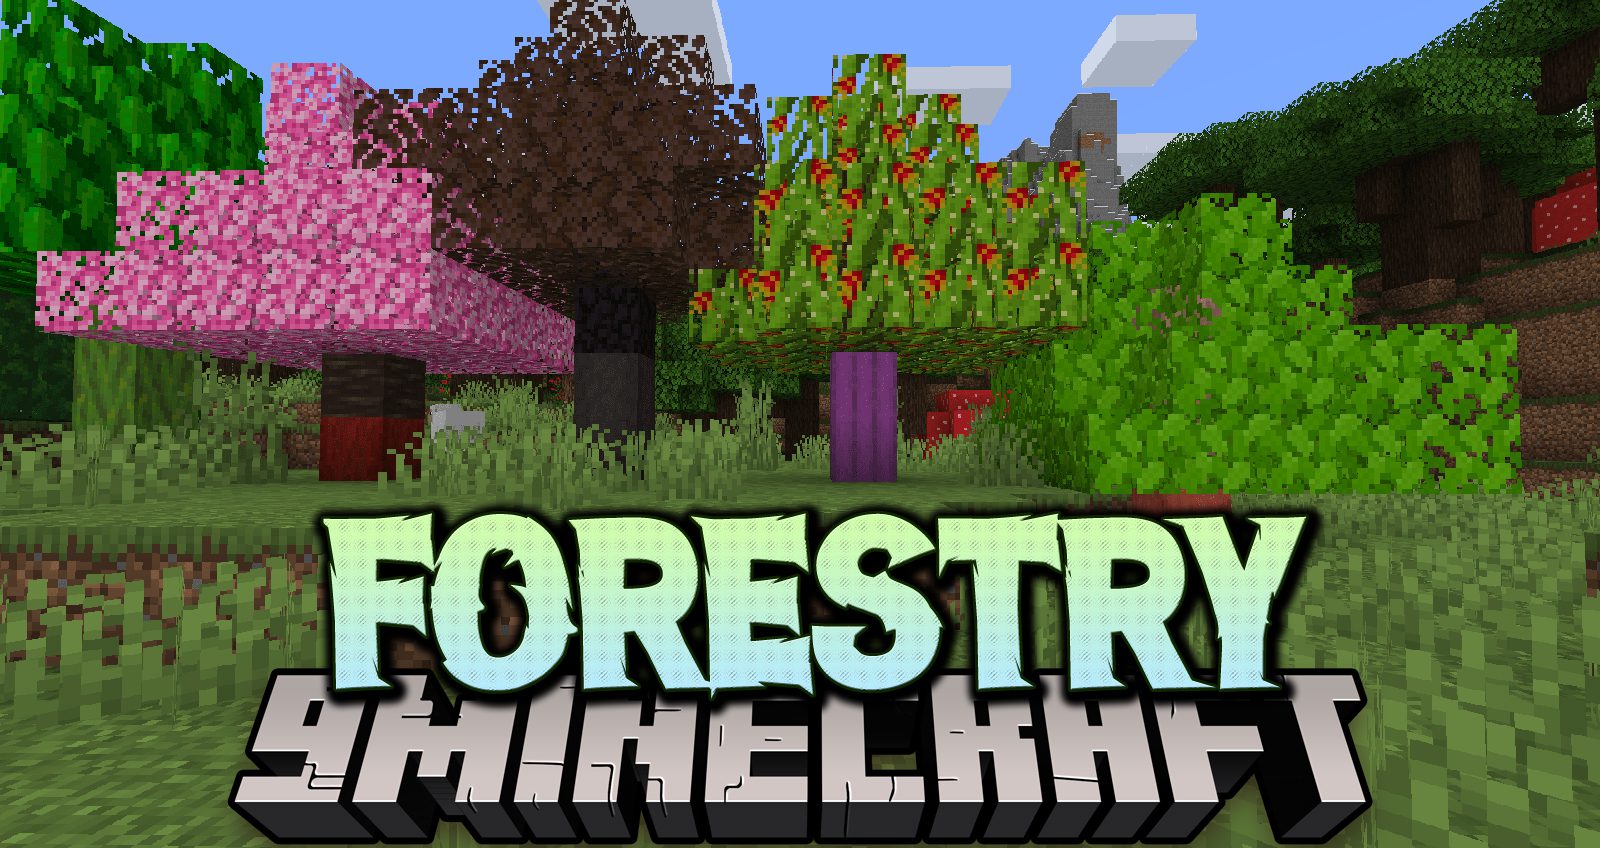 Forestry Mod (1.16.5, 1.12.2) - Bringing Bees, Butterflies and More Trees 1